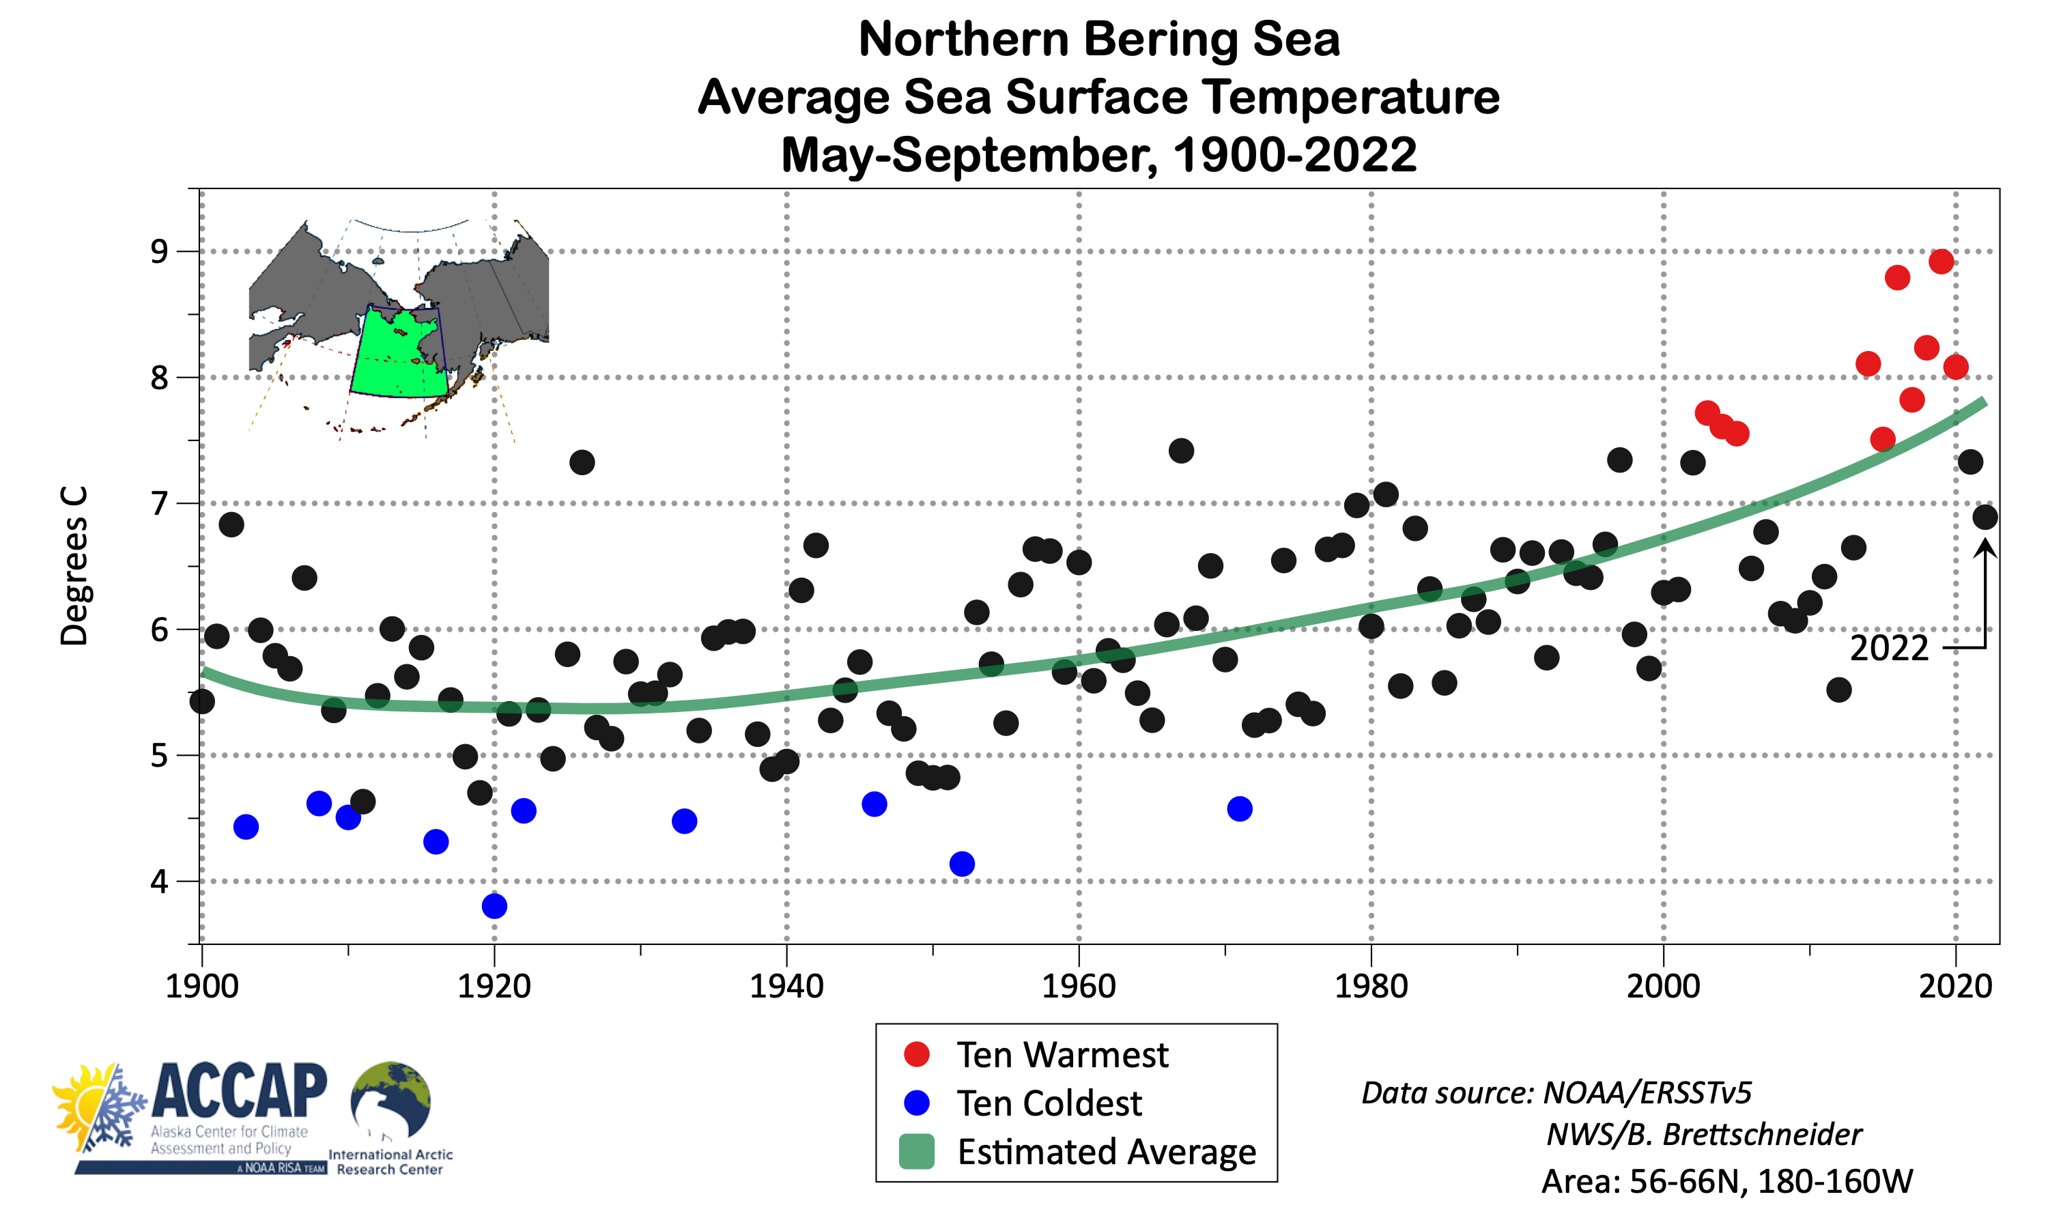 Graph of Bering Sea surface temperatures over time. 